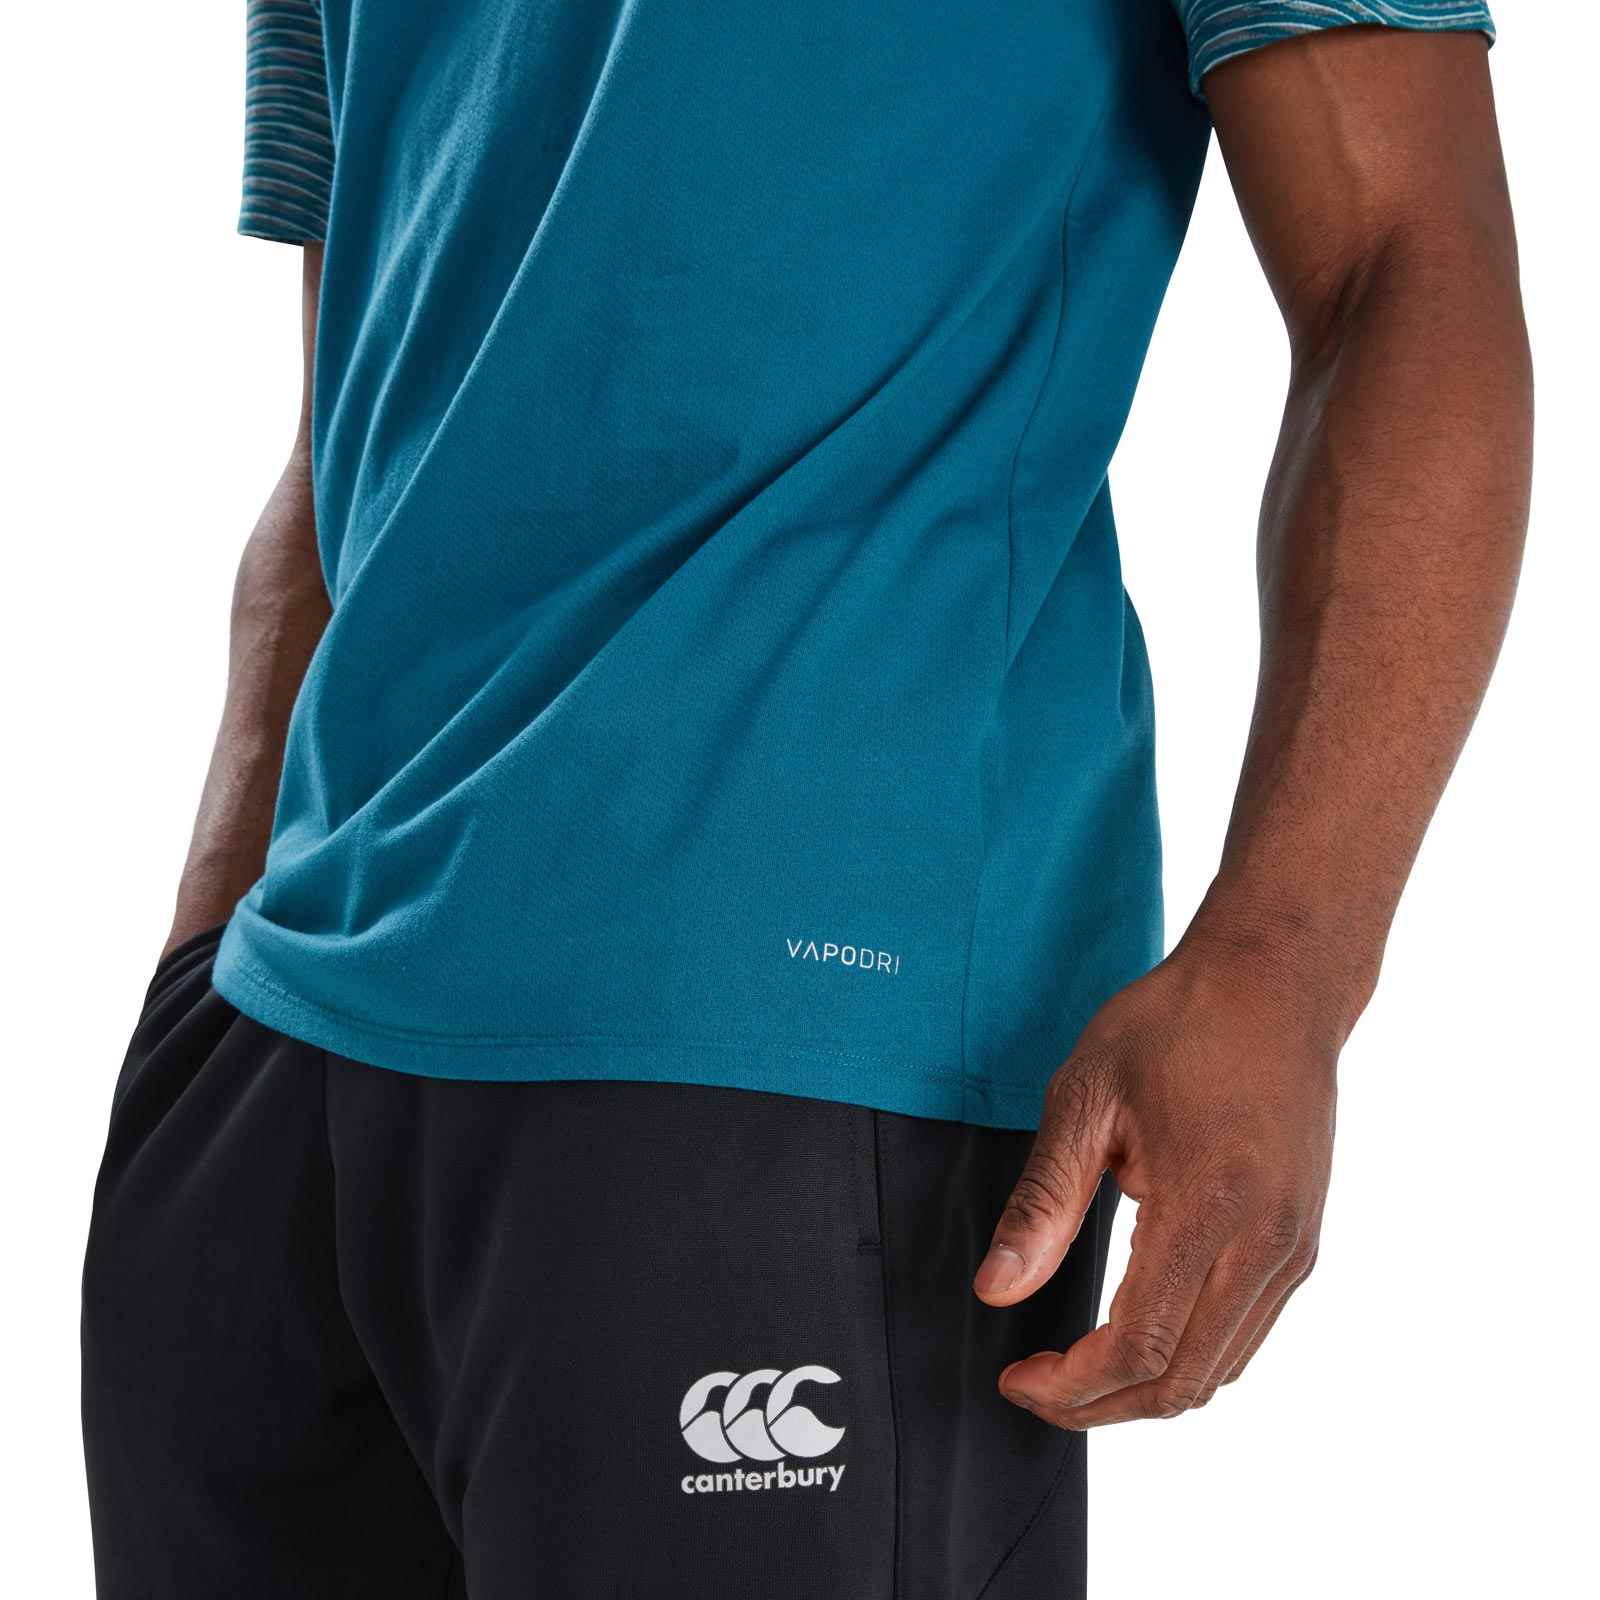 CANTERBURY RUGBY GRAPHIC MENS TRAINING T-SHIRT